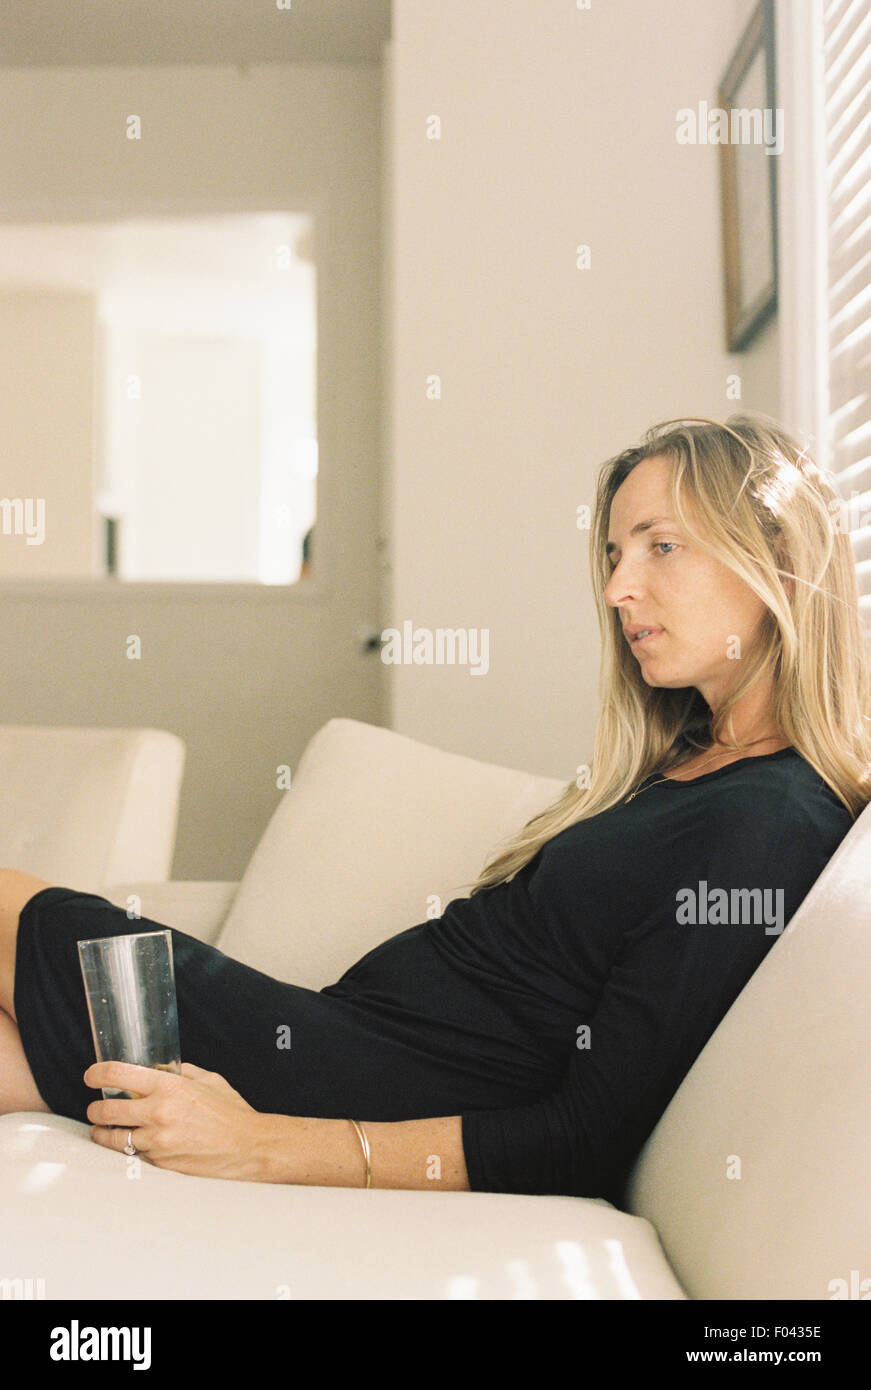 Woman with long blond hair wearing a black dress, sitting on a sofa, holding a glass. Stock Photo